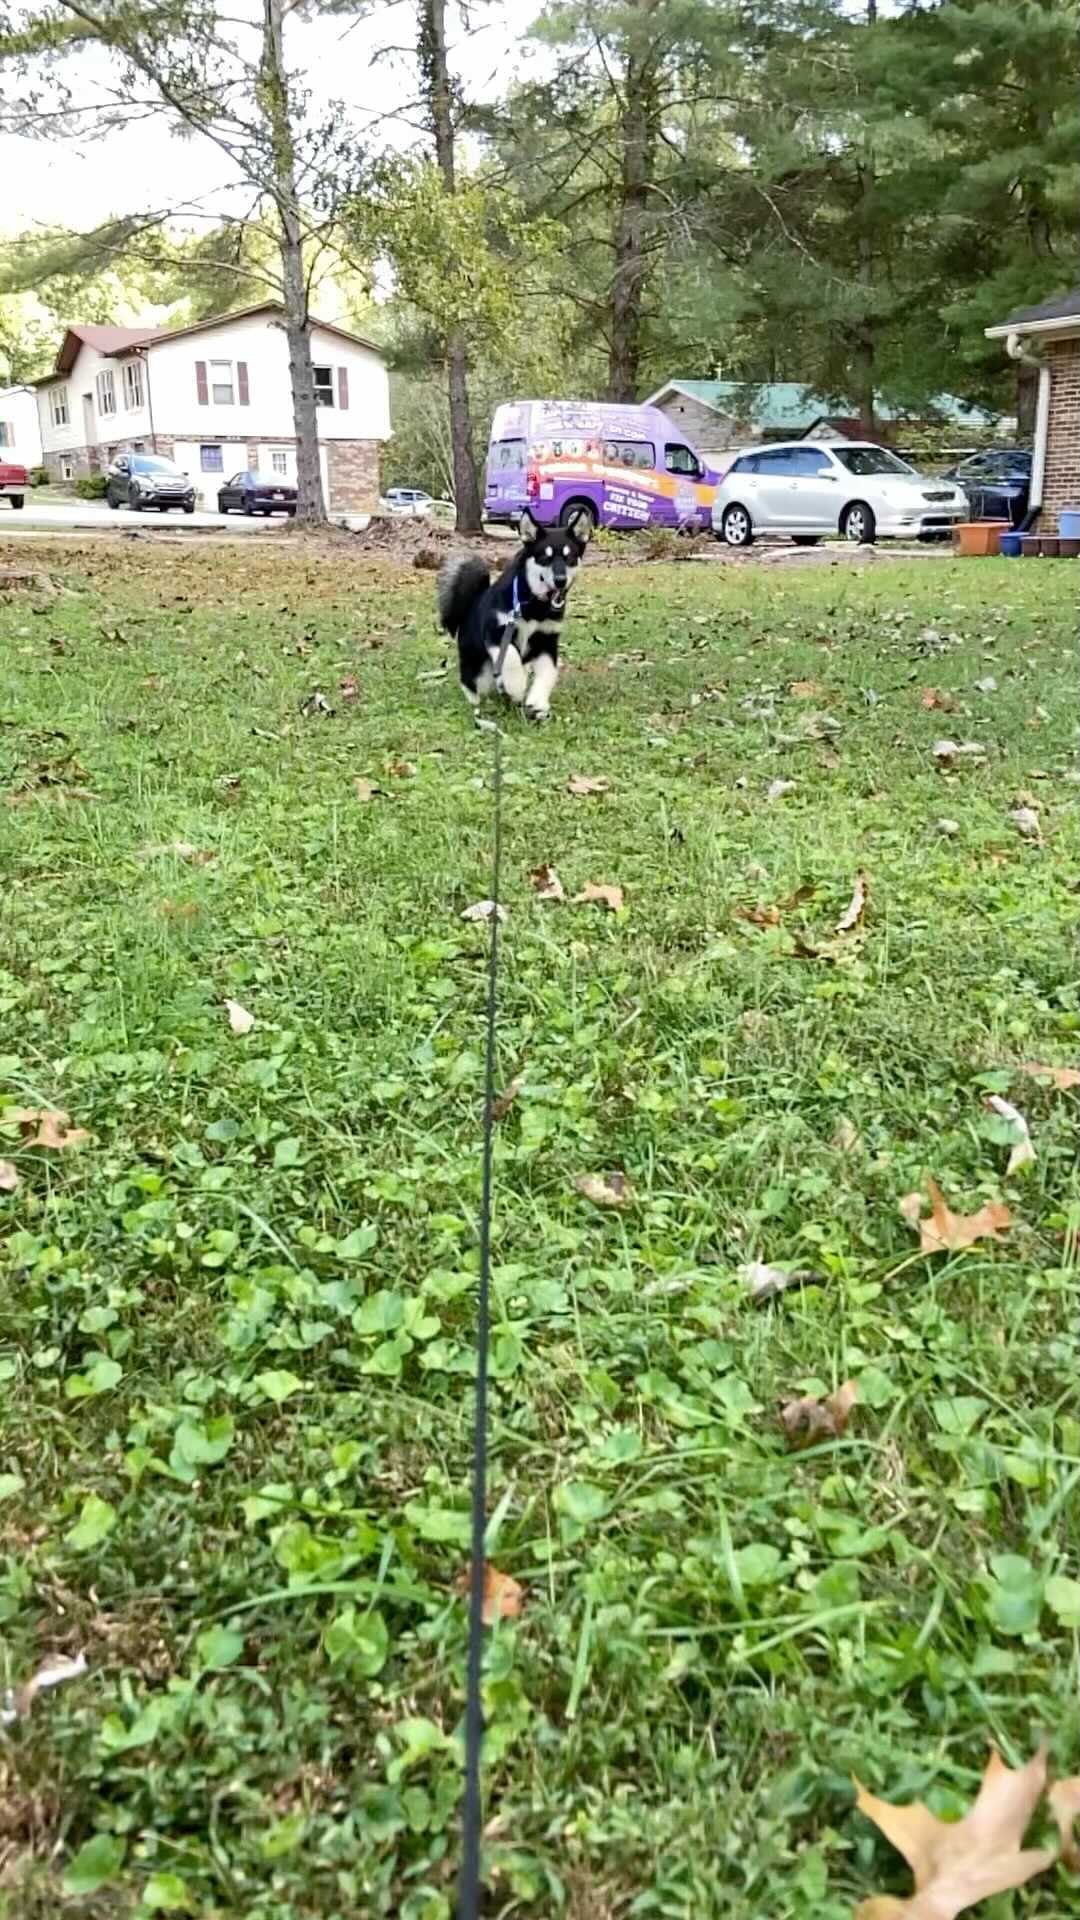 Adoption Preview! Katia the Husky mix puppy showing off her moves! <a target='_blank' href='https://www.instagram.com/explore/tags/huskiesofinstagram/'>#huskiesofinstagram</a> <a target='_blank' href='https://www.instagram.com/explore/tags/huskymix/'>#huskymix</a> <a target='_blank' href='https://www.instagram.com/explore/tags/huskyrescue/'>#huskyrescue</a> <a target='_blank' href='https://www.instagram.com/explore/tags/huskypuppy/'>#huskypuppy</a> <a target='_blank' href='https://www.instagram.com/explore/tags/huskypuppies/'>#huskypuppies</a> she will be ready for adoption in 2 weeks!